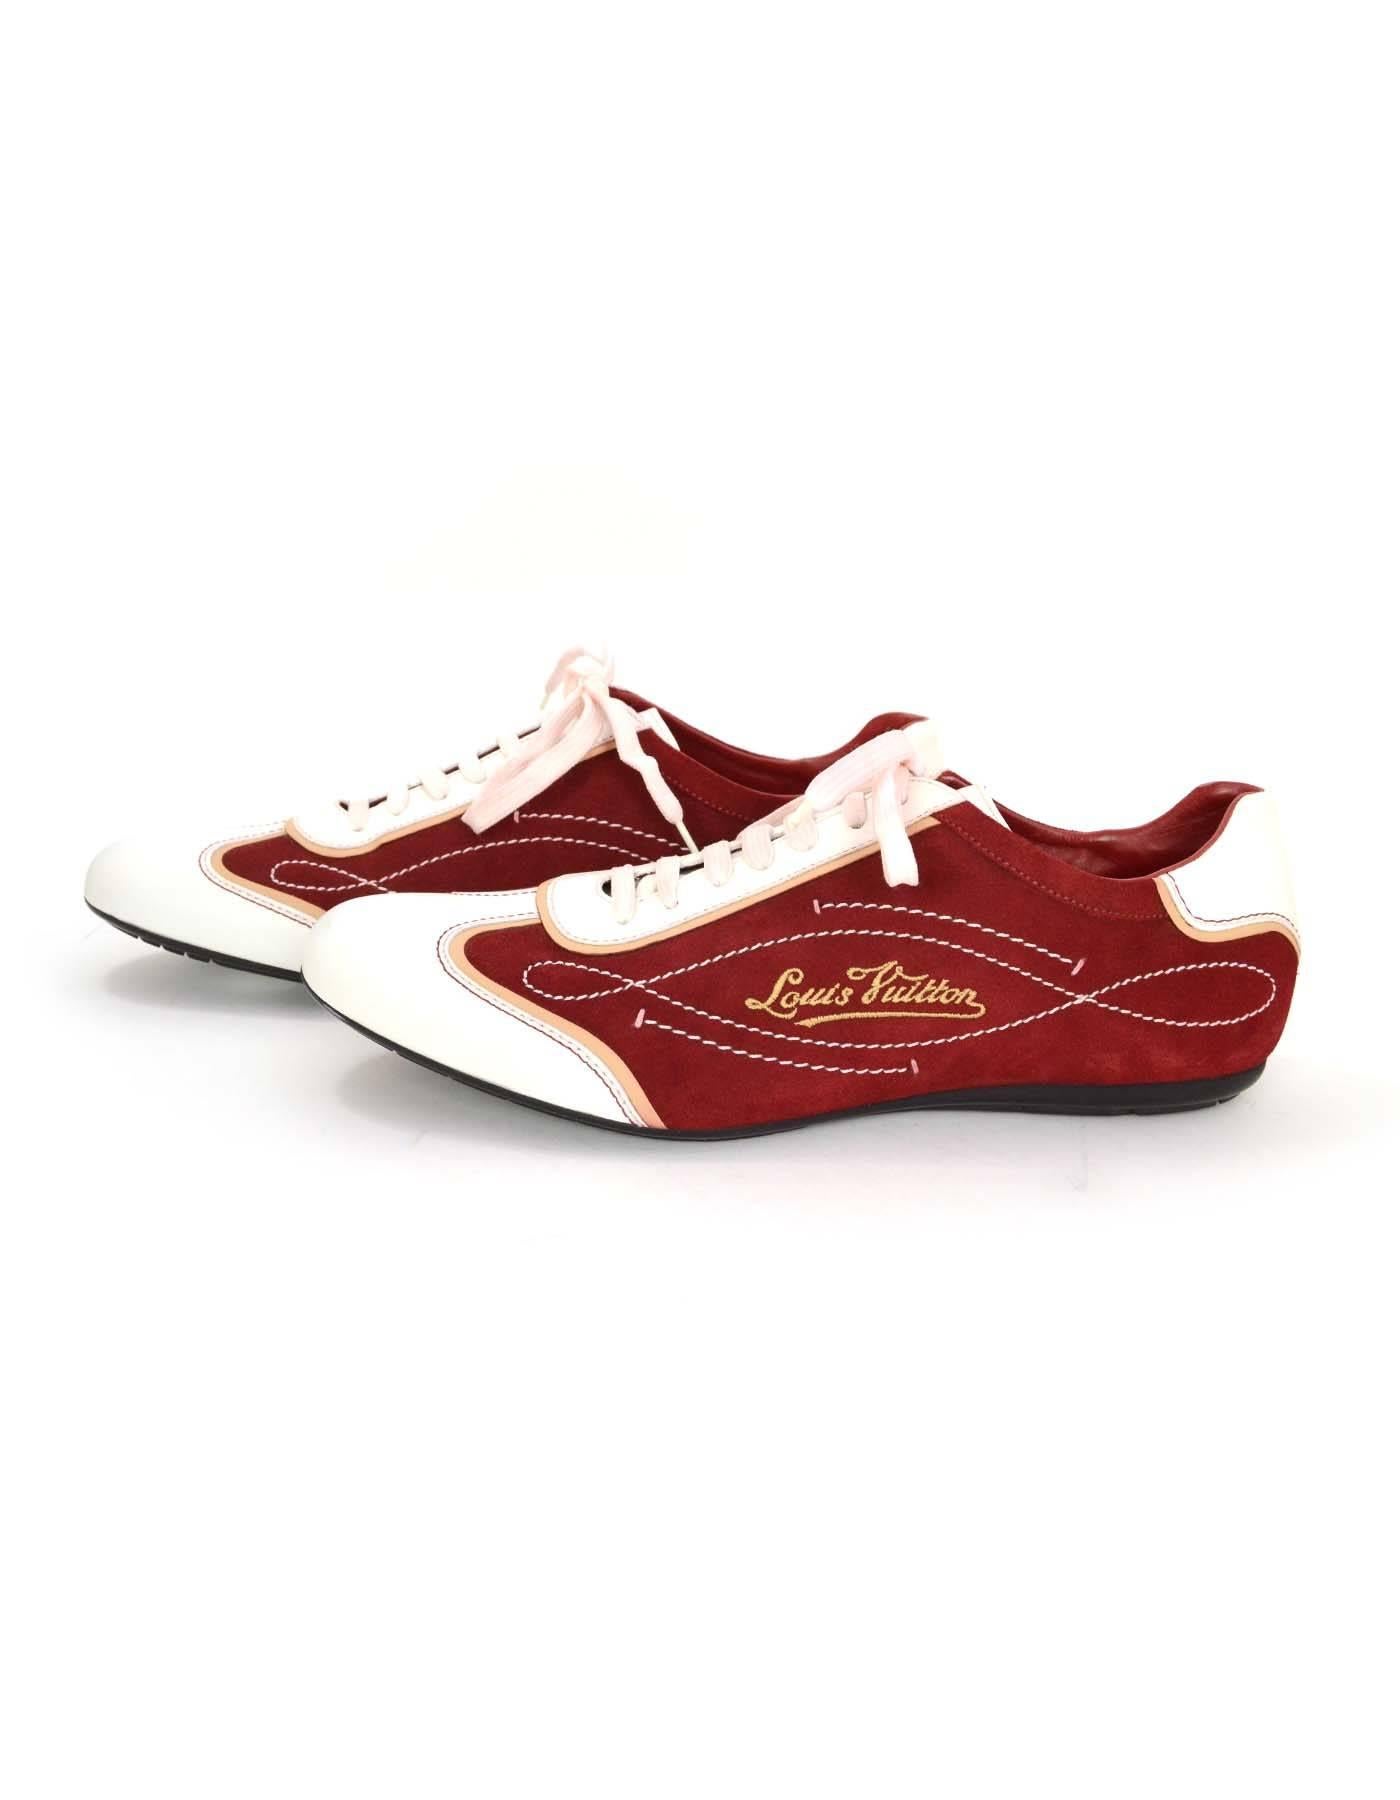 Louis Vuitton Men's Red Suede & White Leather Sneakers
Features Louis Vuitton embroidered on sides with decorative white contrast stitching
Made In: Italy
Color: Red and white
Materials: Suede and leather
Closure/Opening: Laces
Sole Stamp: